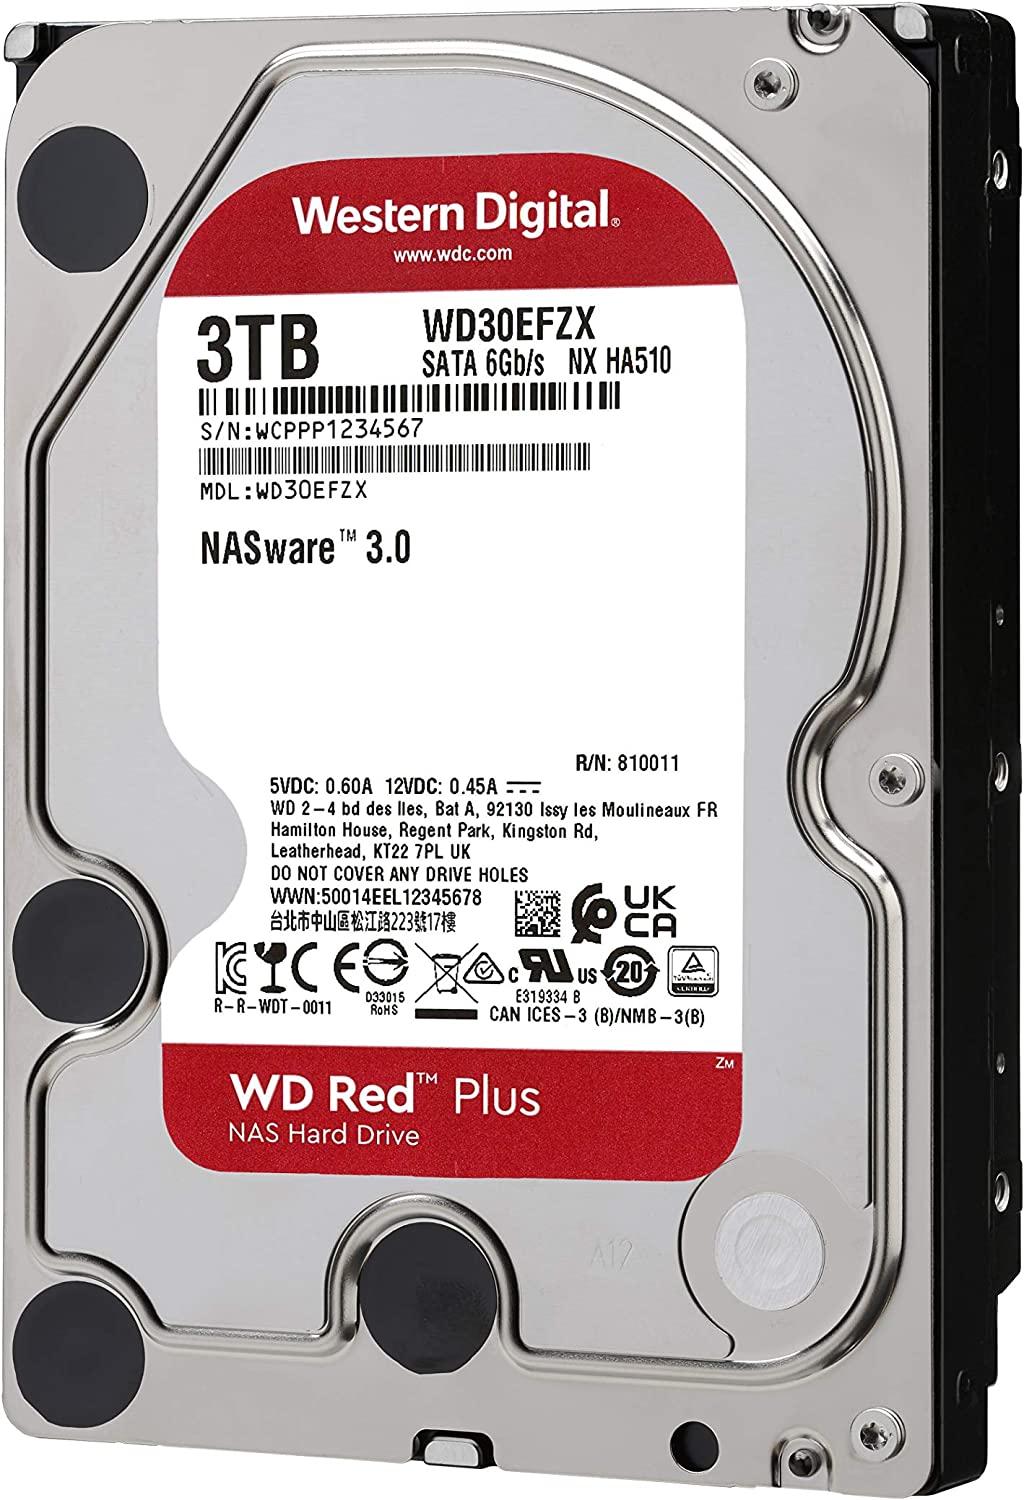 Хард диск WD Red PLUS NAS, 3TB, 5400rpm, 128MB, SATA 3-2